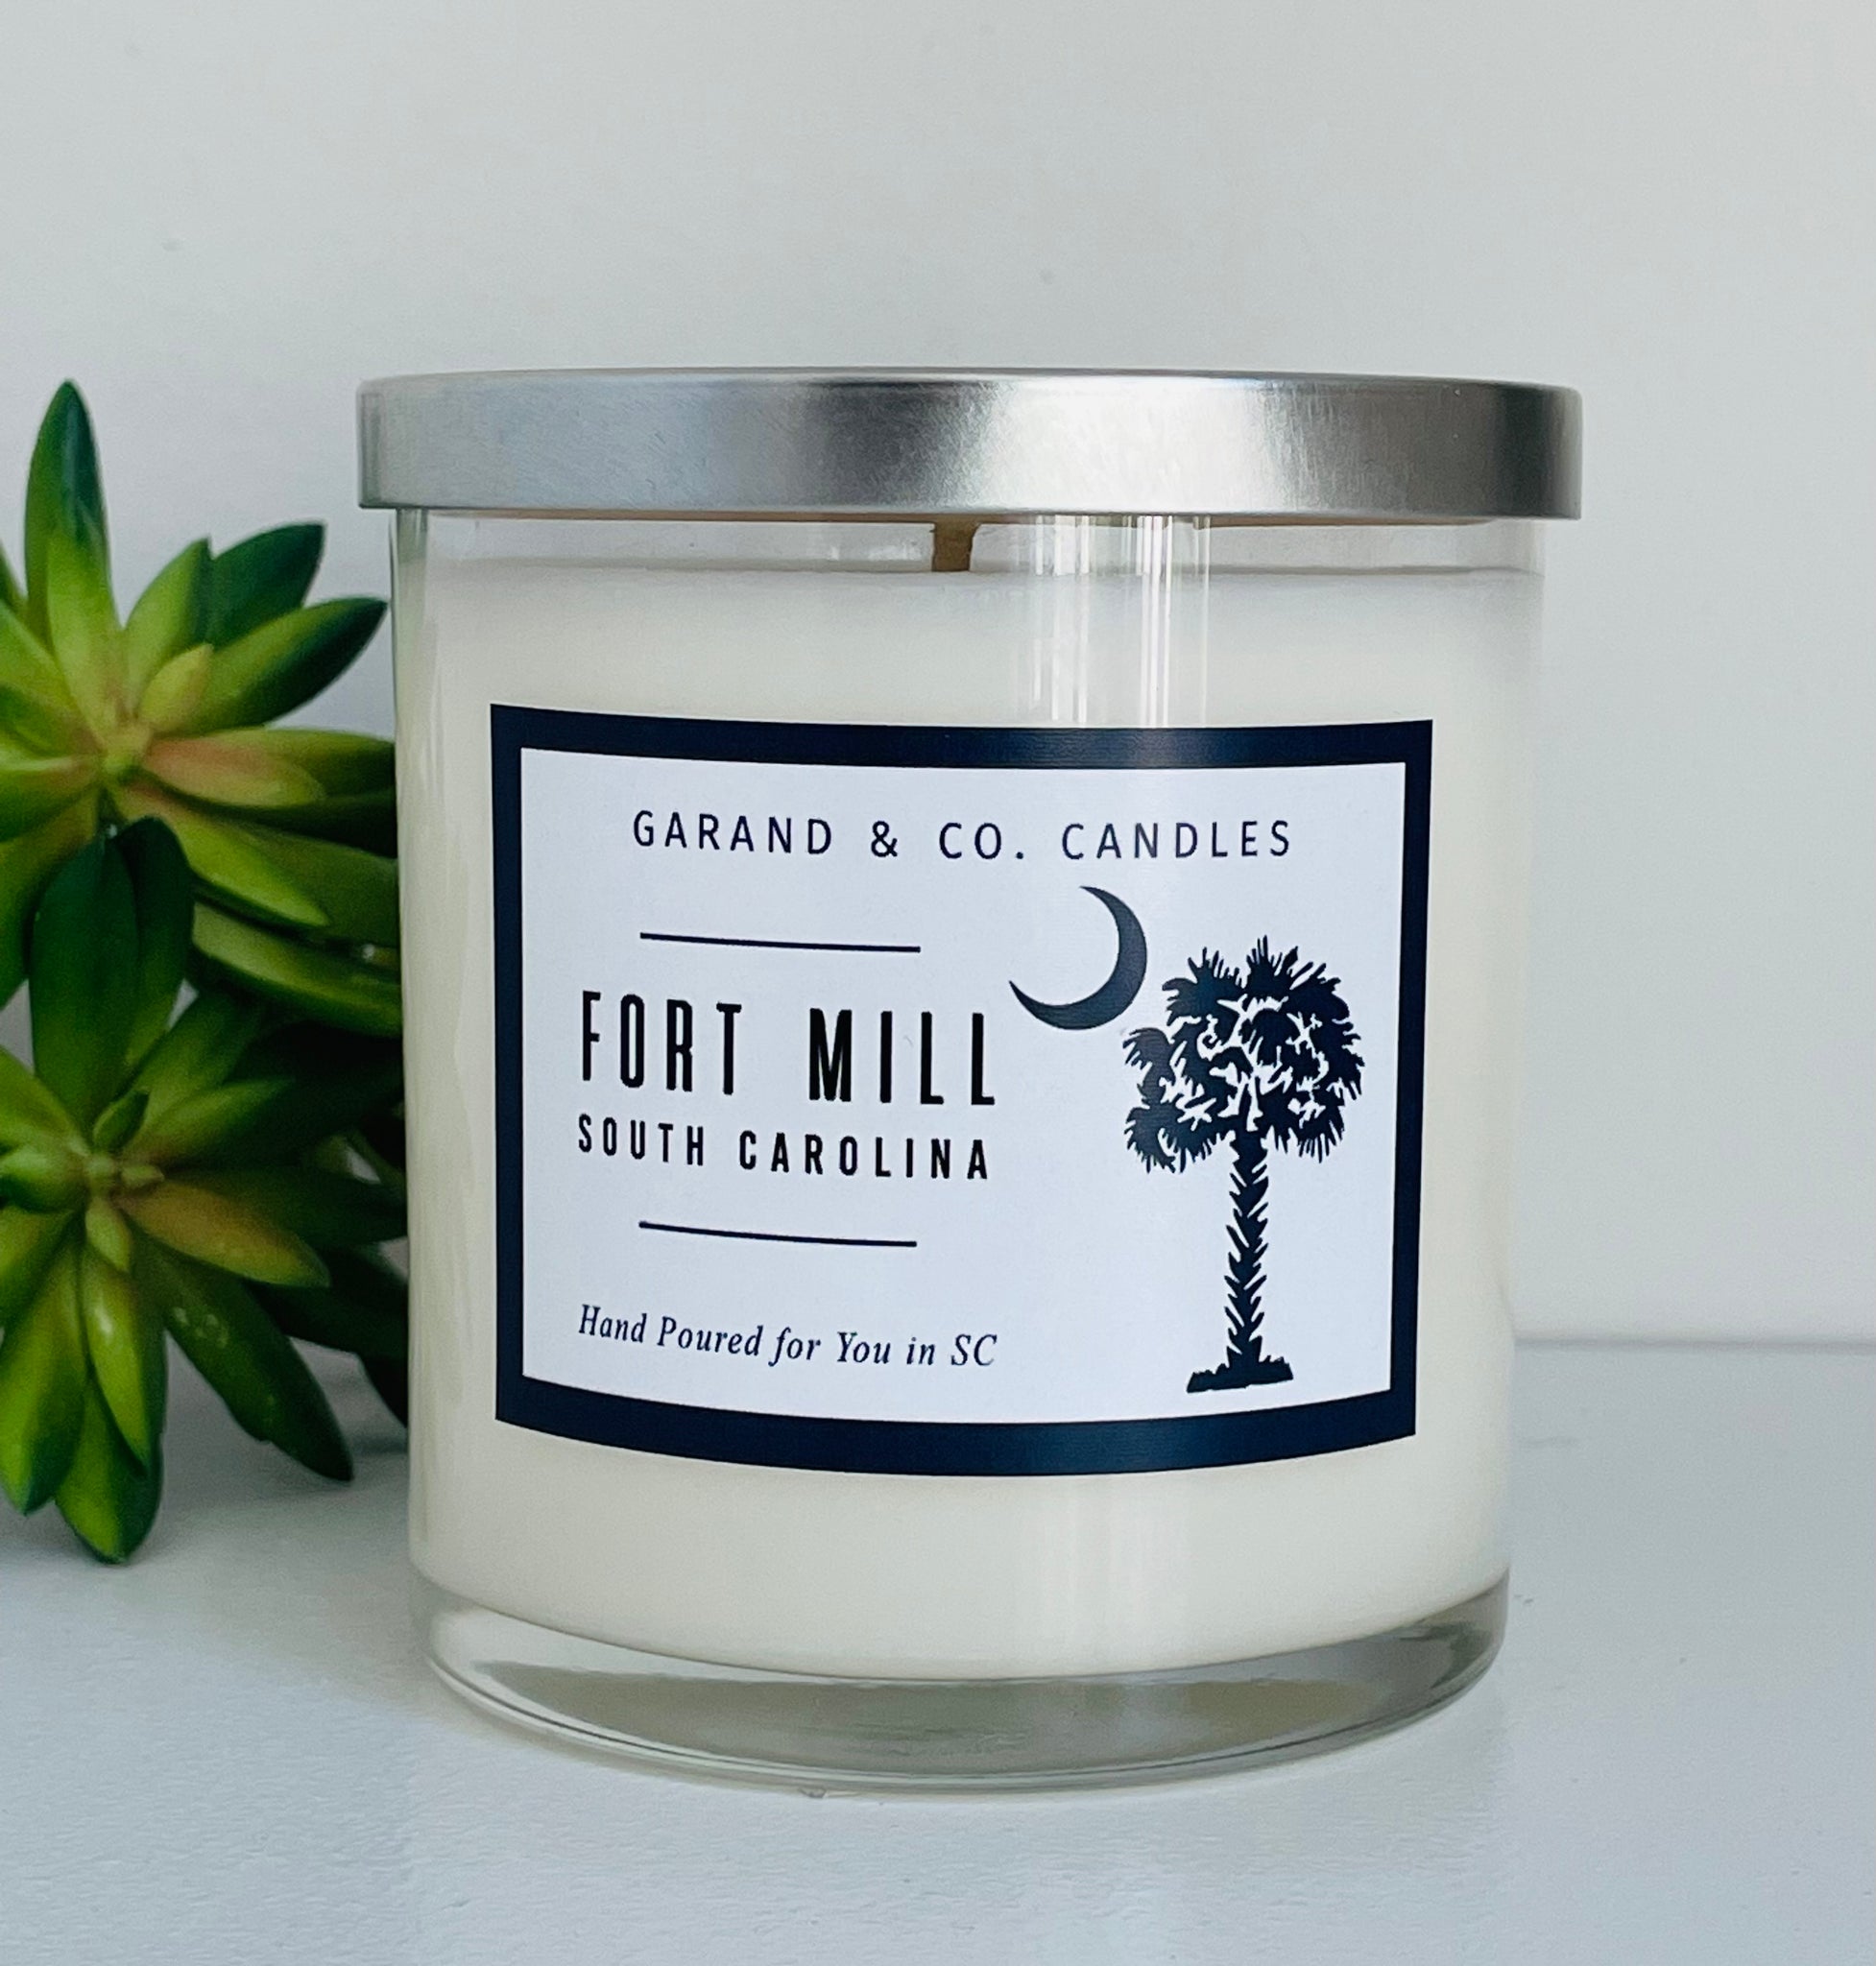 12 oz Clear Glass Jar Candle - Fort Mill, SC Palm and Crest